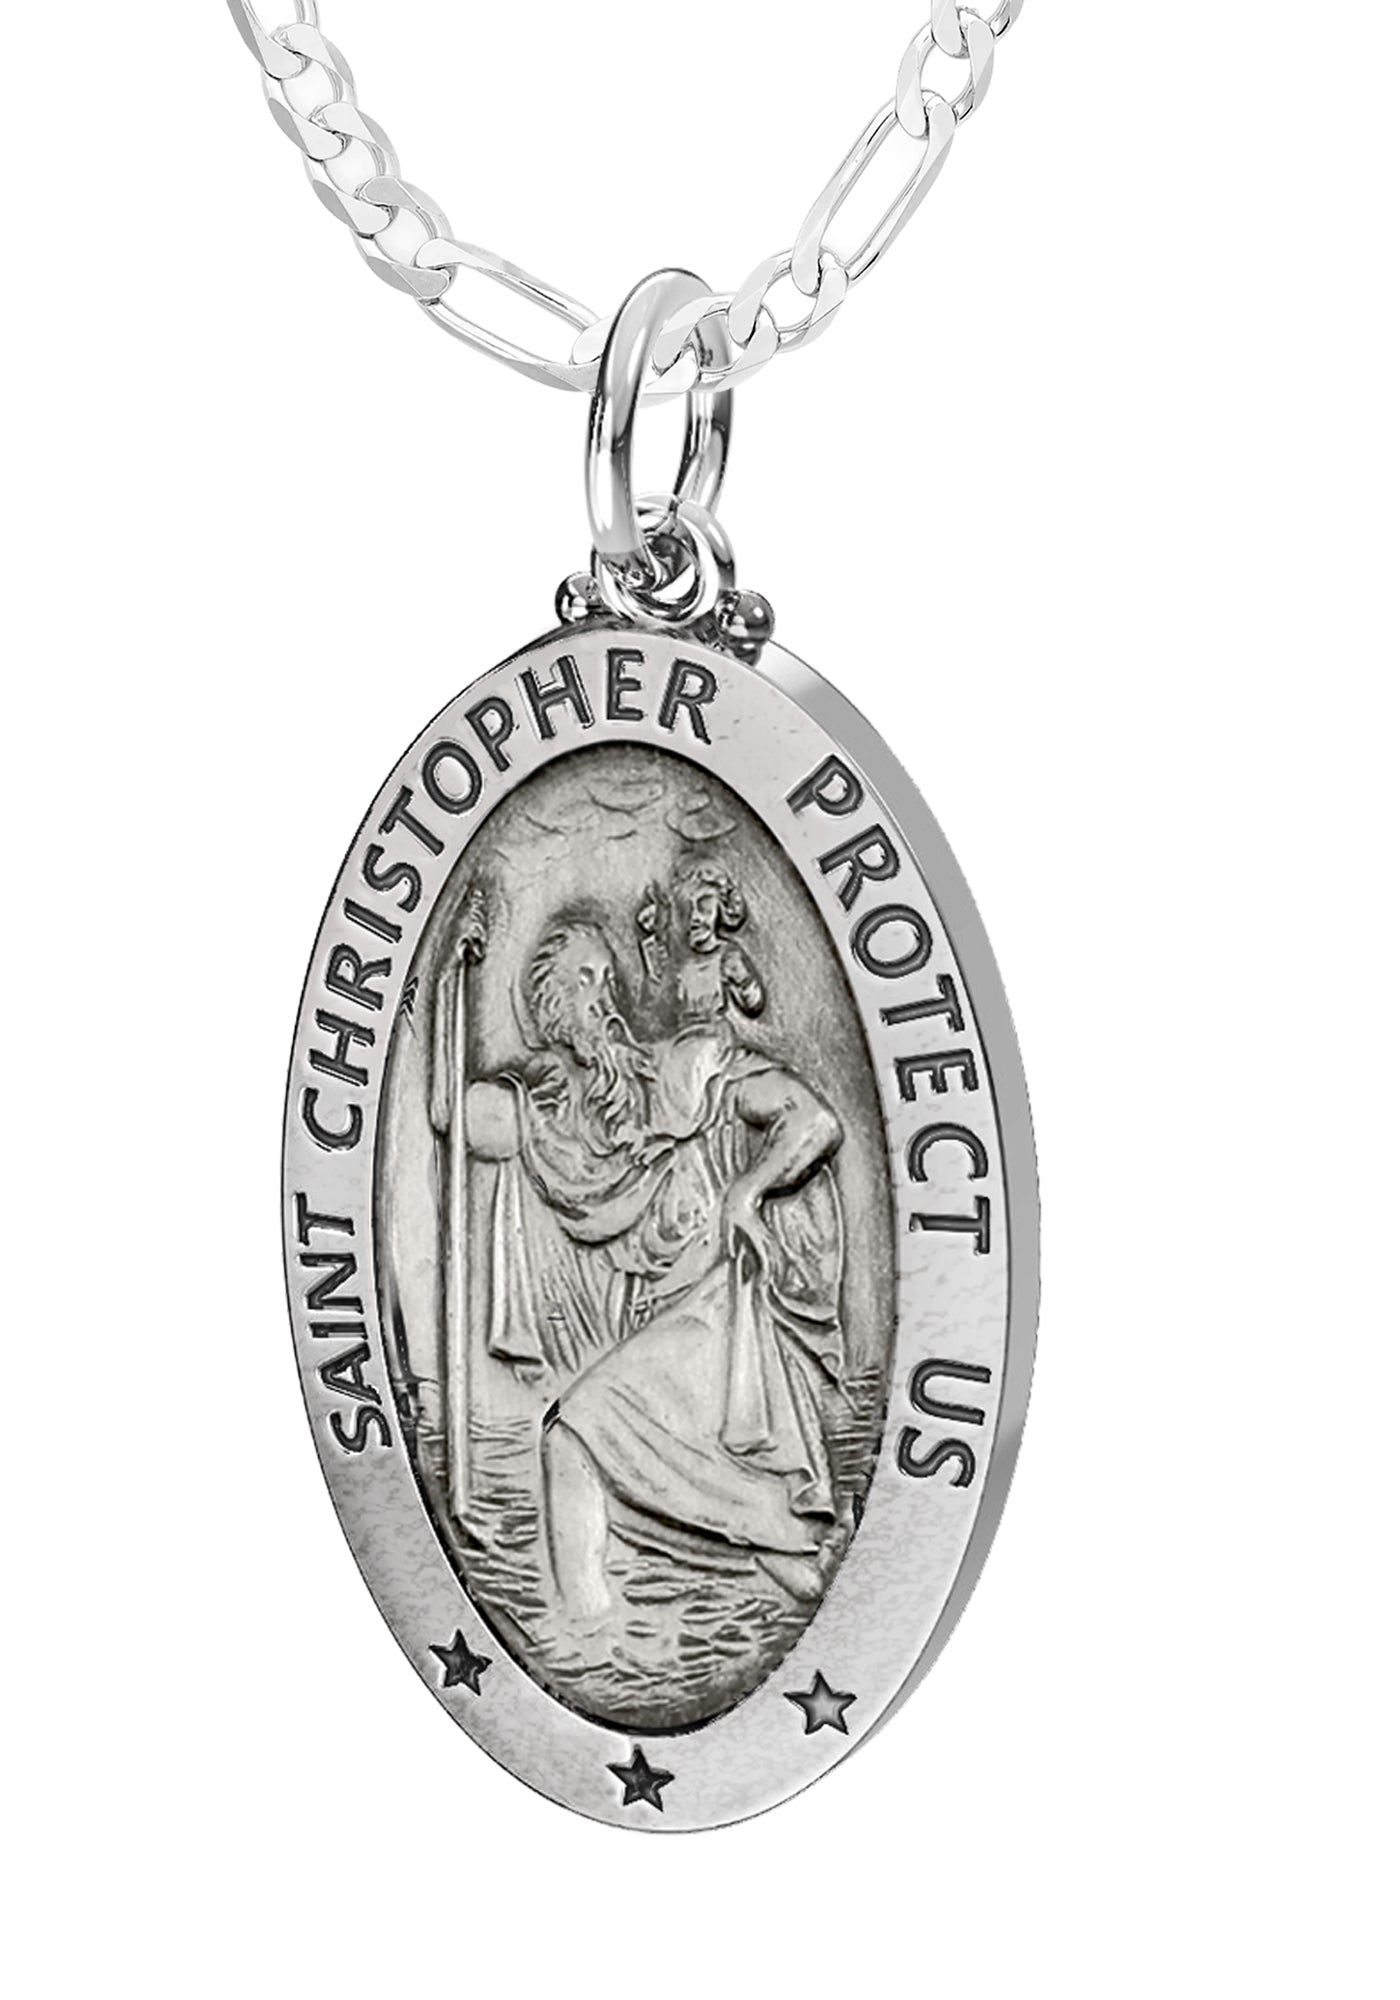 St Christopher Necklace - Pendant Necklace In Oval Ladies